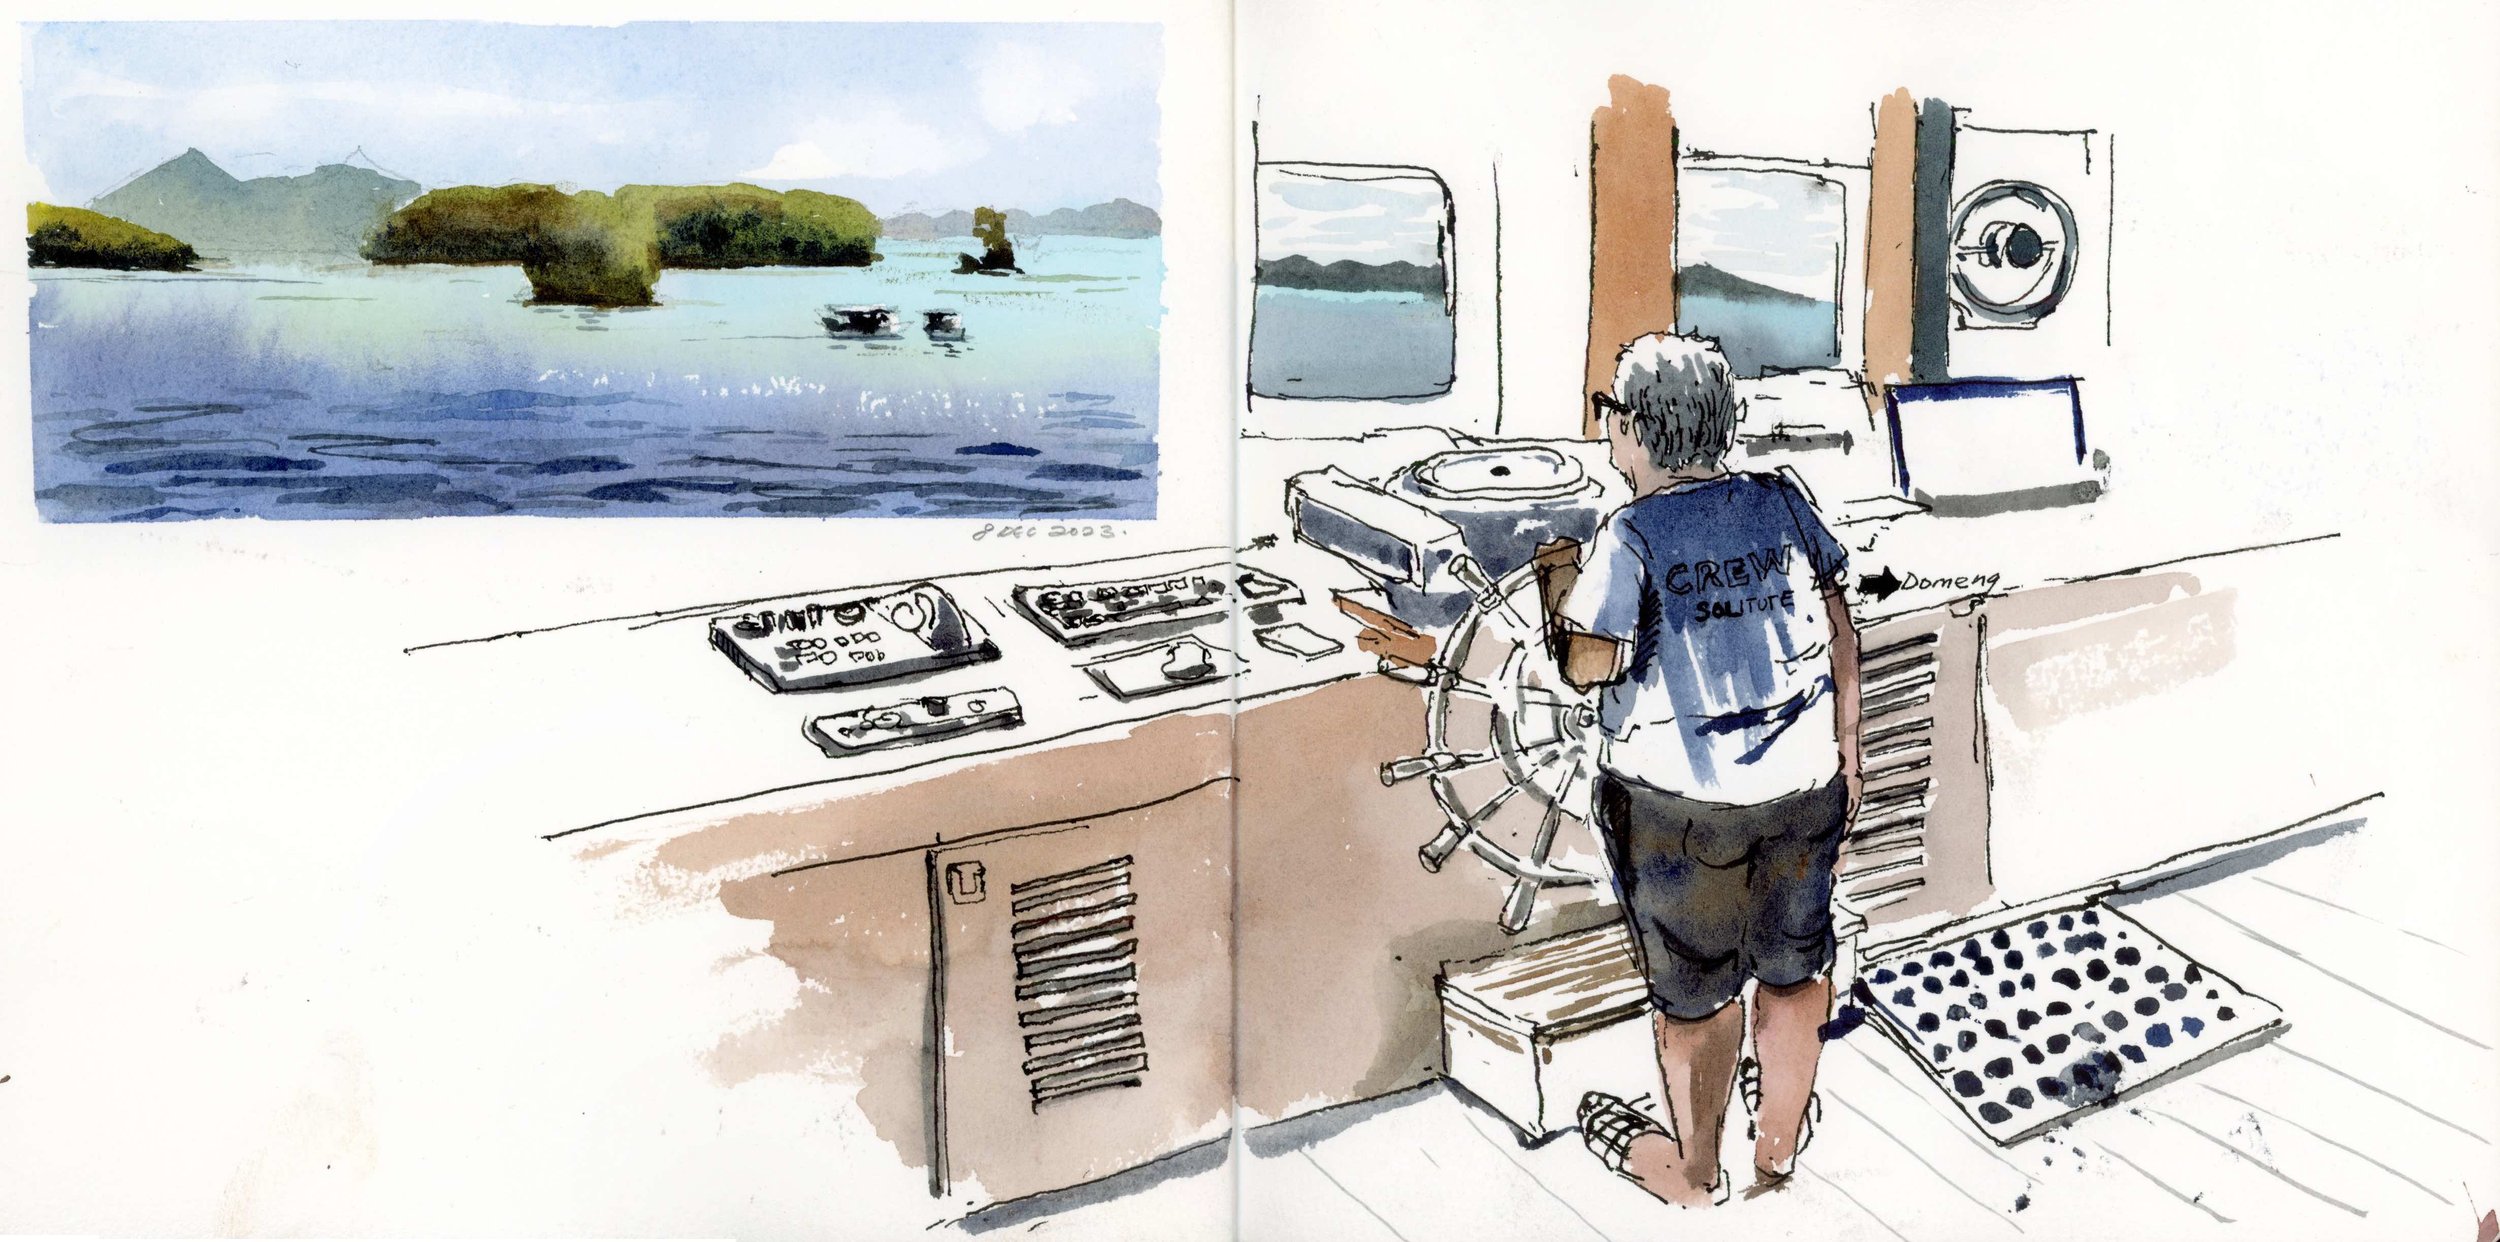  Sketch capturing Domeng tending to the ship, while I immersed myself in creating a small plein air piece featuring the mesmerizing rock island outside. The pristine, clear turquoise water surrounding us was nothing short of incredible. 